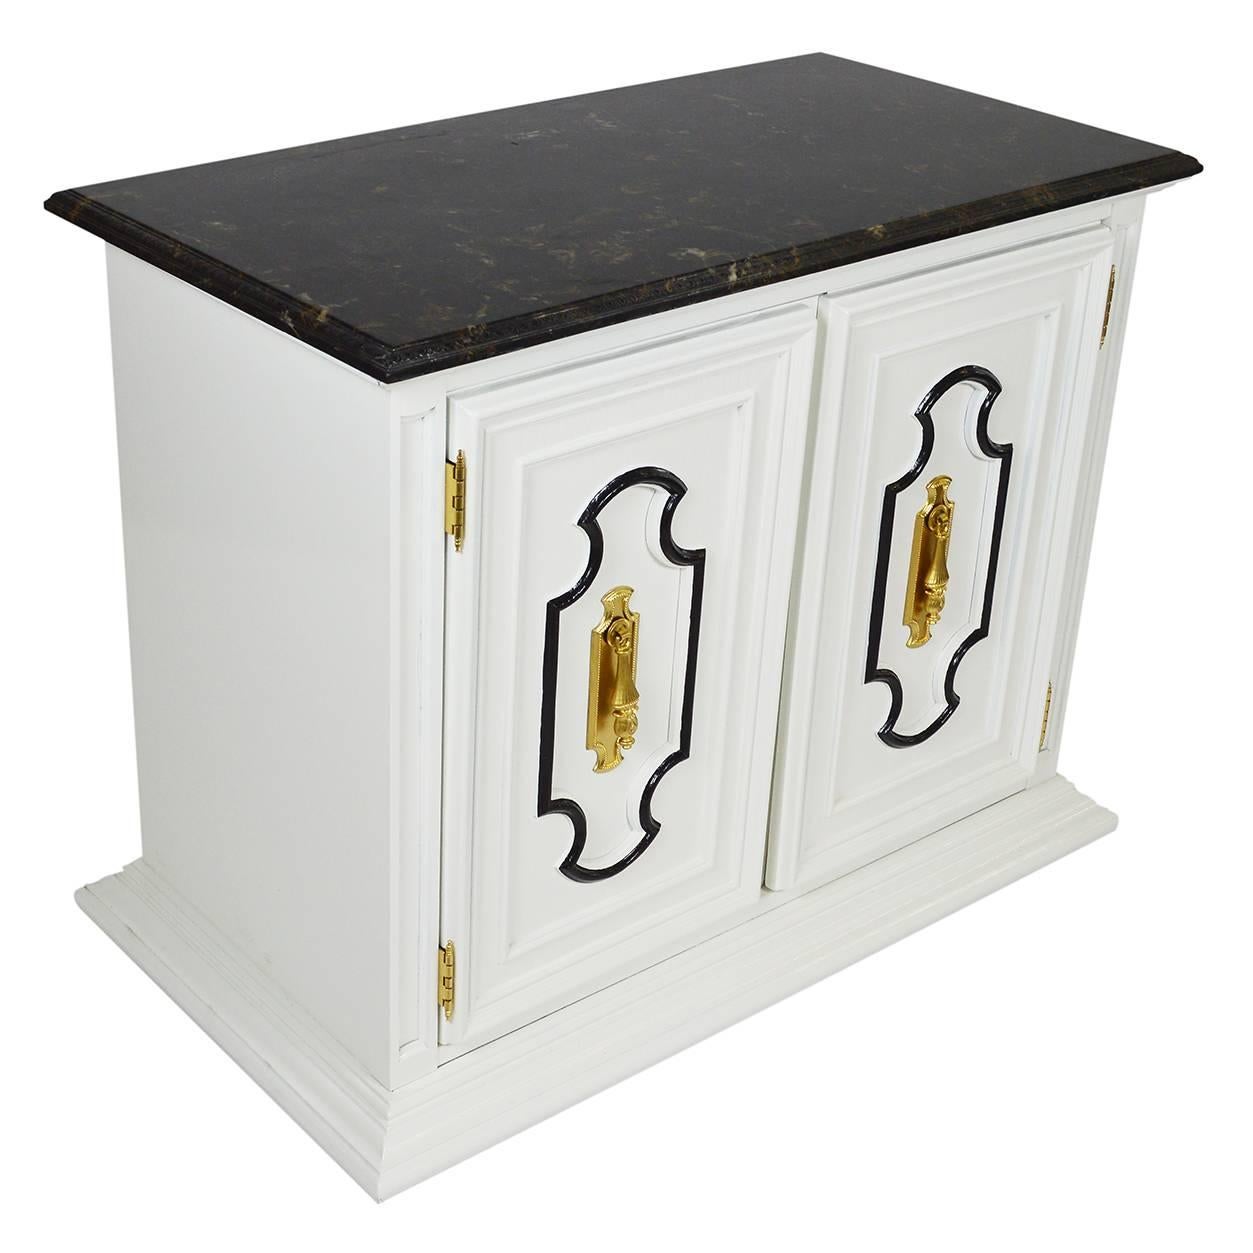 Vintage Midcentury marble-top bar cabinet. The cabinet is crafted in a Dorothy Draper-style and is newly lacquered in white with black trim and brass hardware and mounted on castors for easy movement. Inside the double cabinet doors is a shelf and